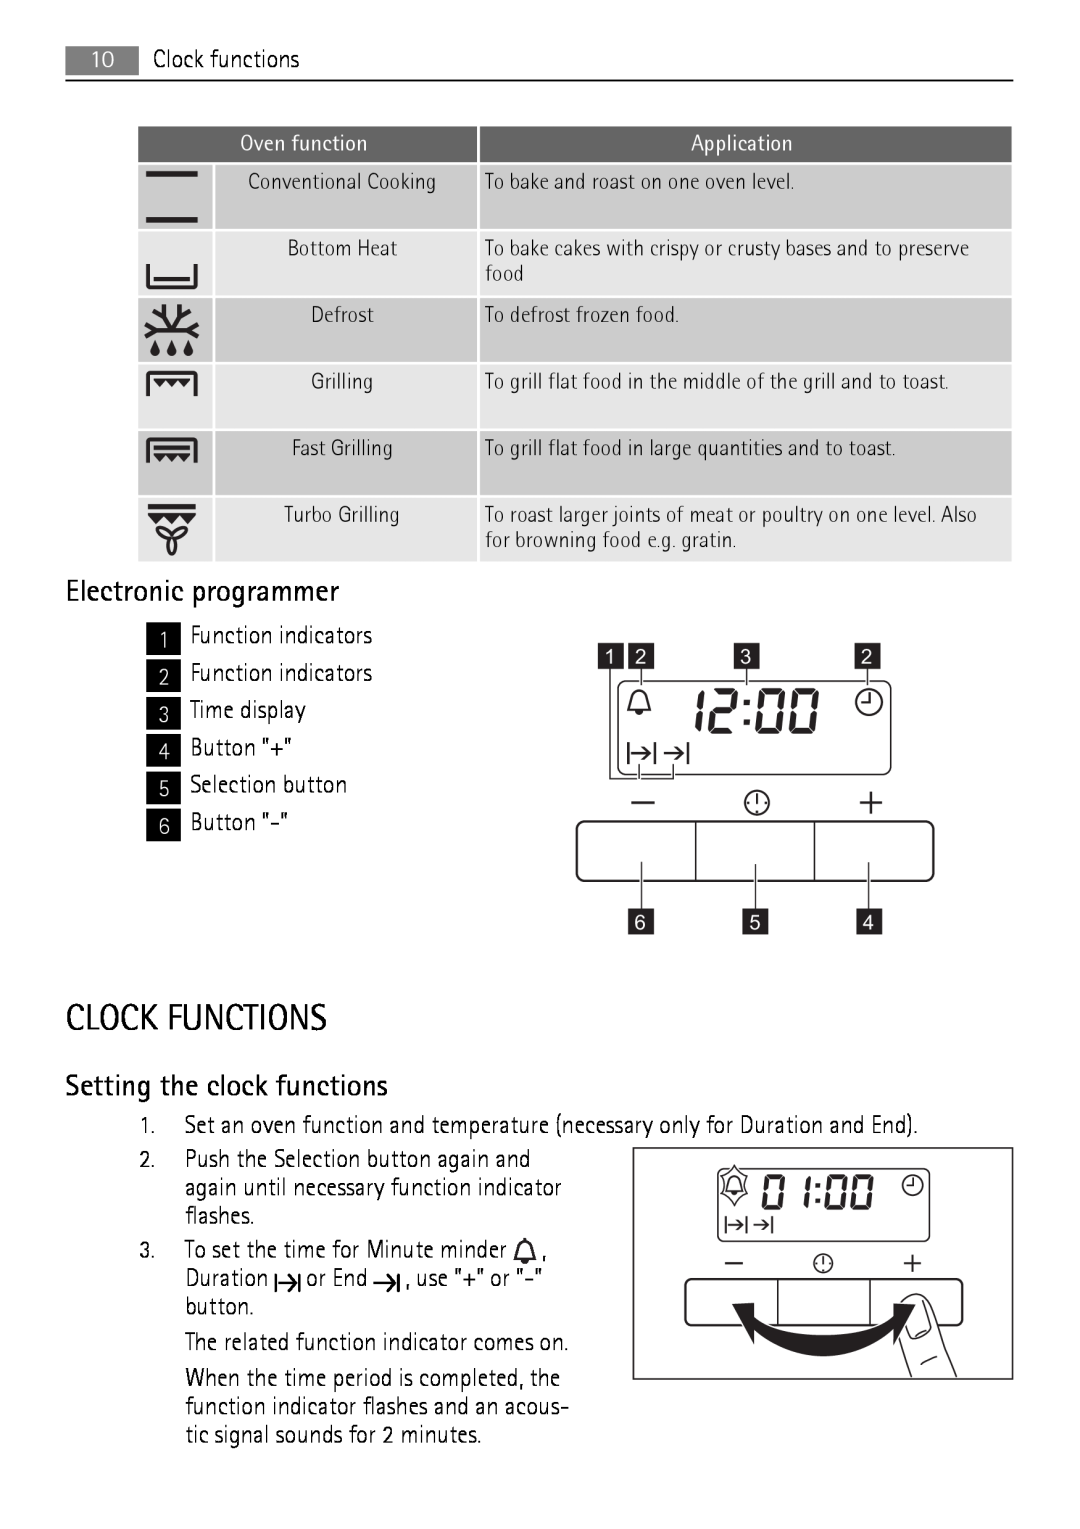 AEG BE3013021 Clock Functions, Setting the clock functions, Electronic programmer, Function indicators, Time display, food 